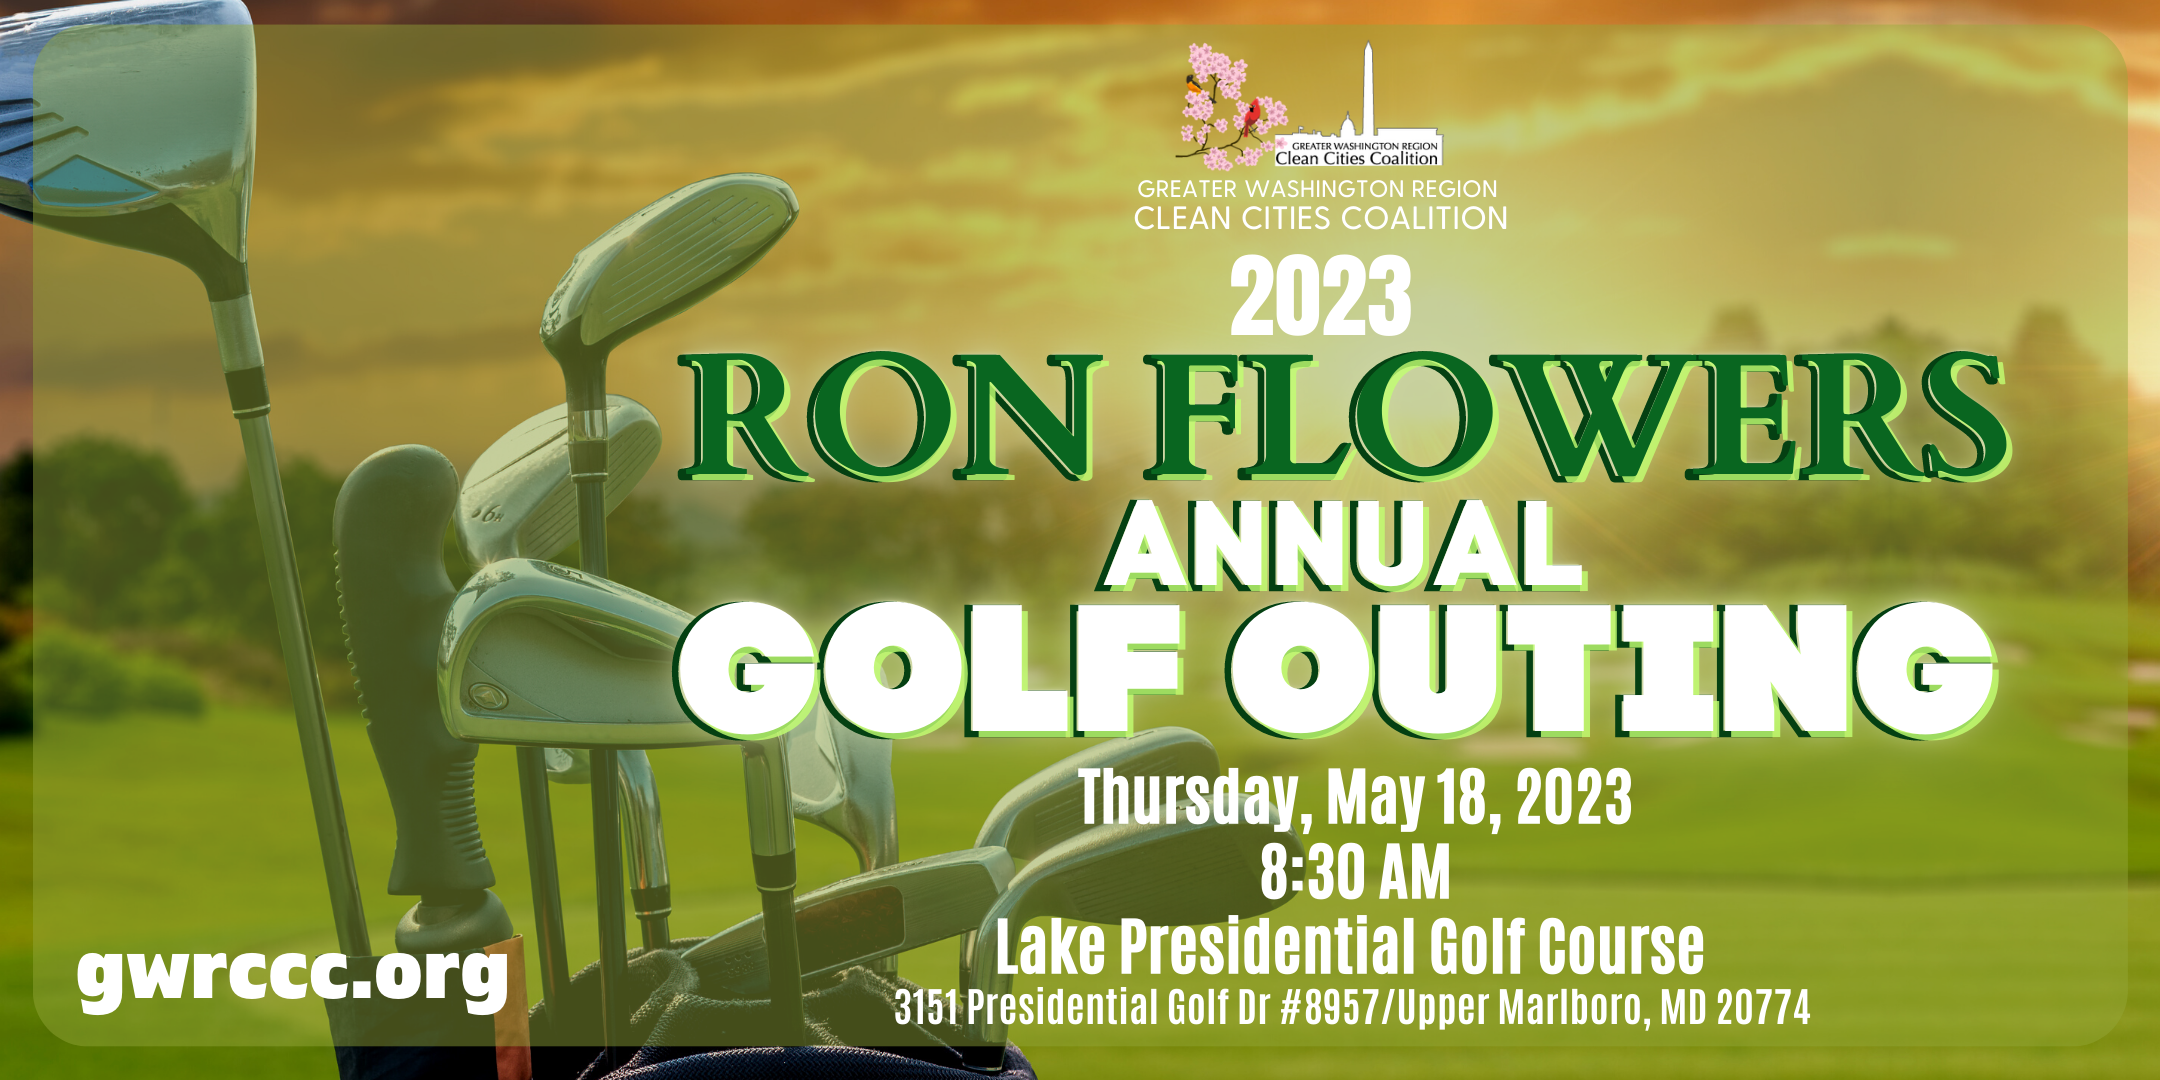 The Ron Flowers Annual Golf Outing and Fundraiser